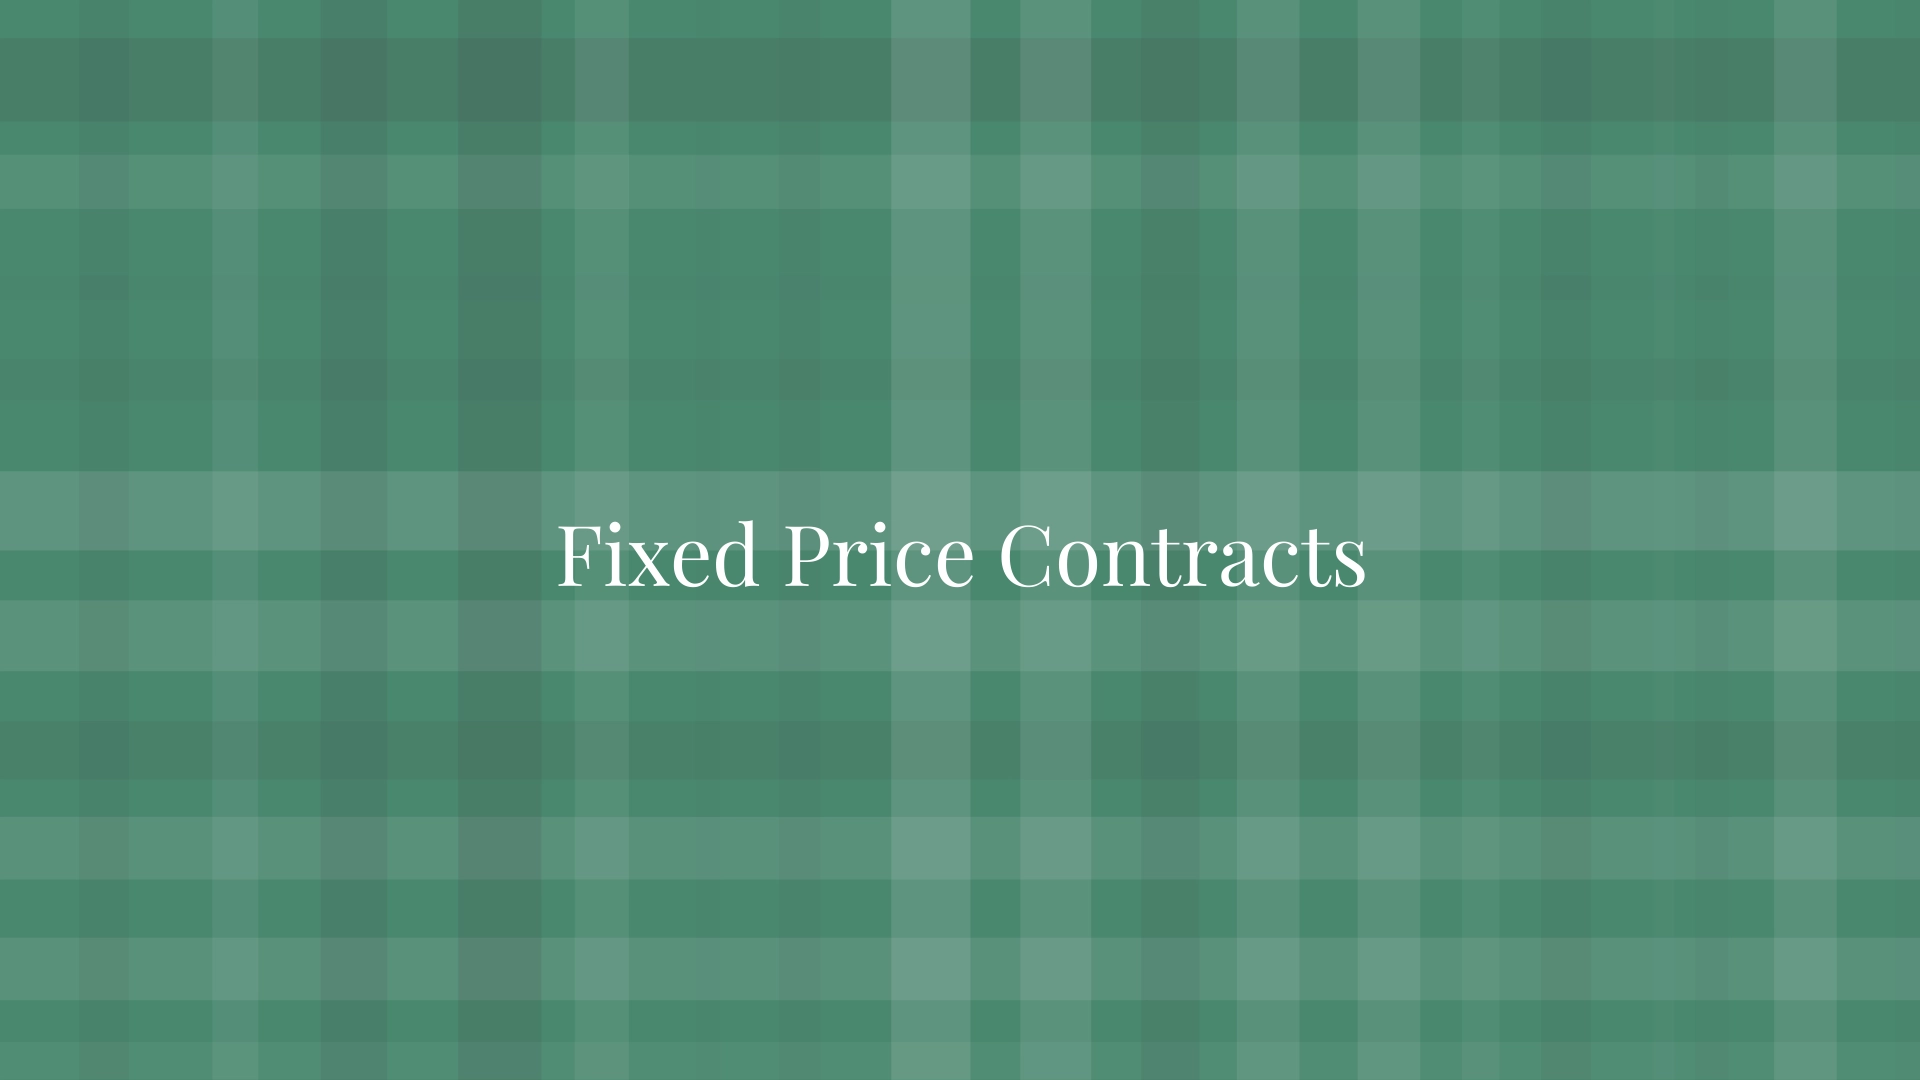 Fixed Price Contracts